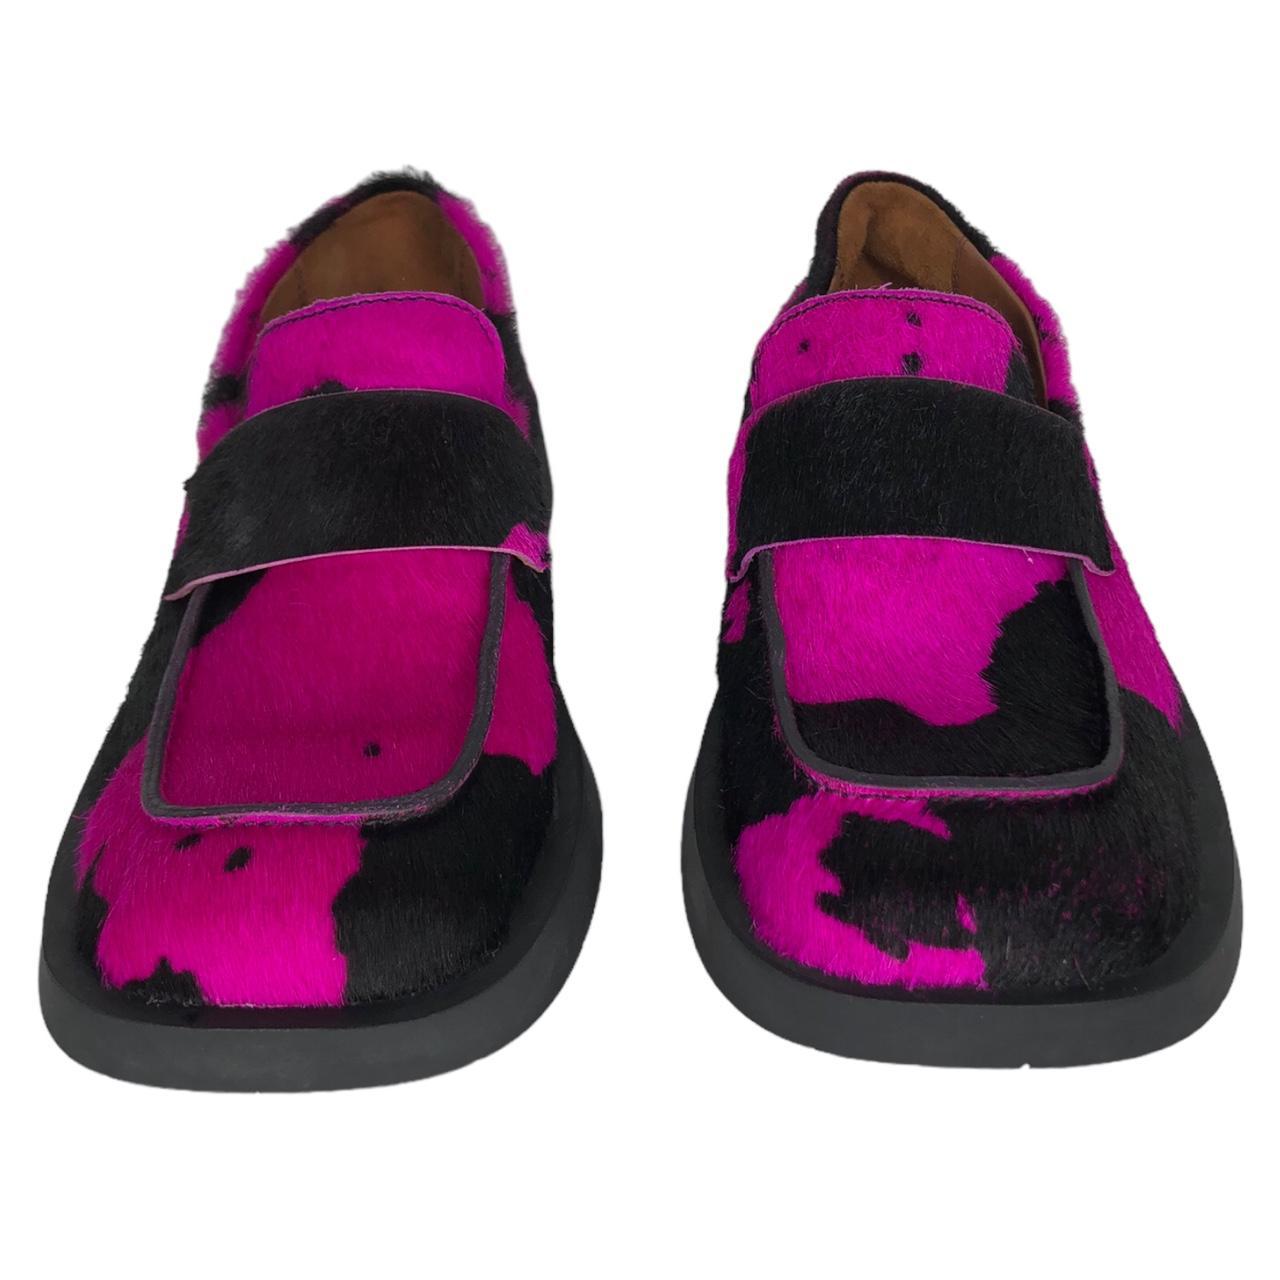 CamperLab Women's Pink and Black Loafers (2)